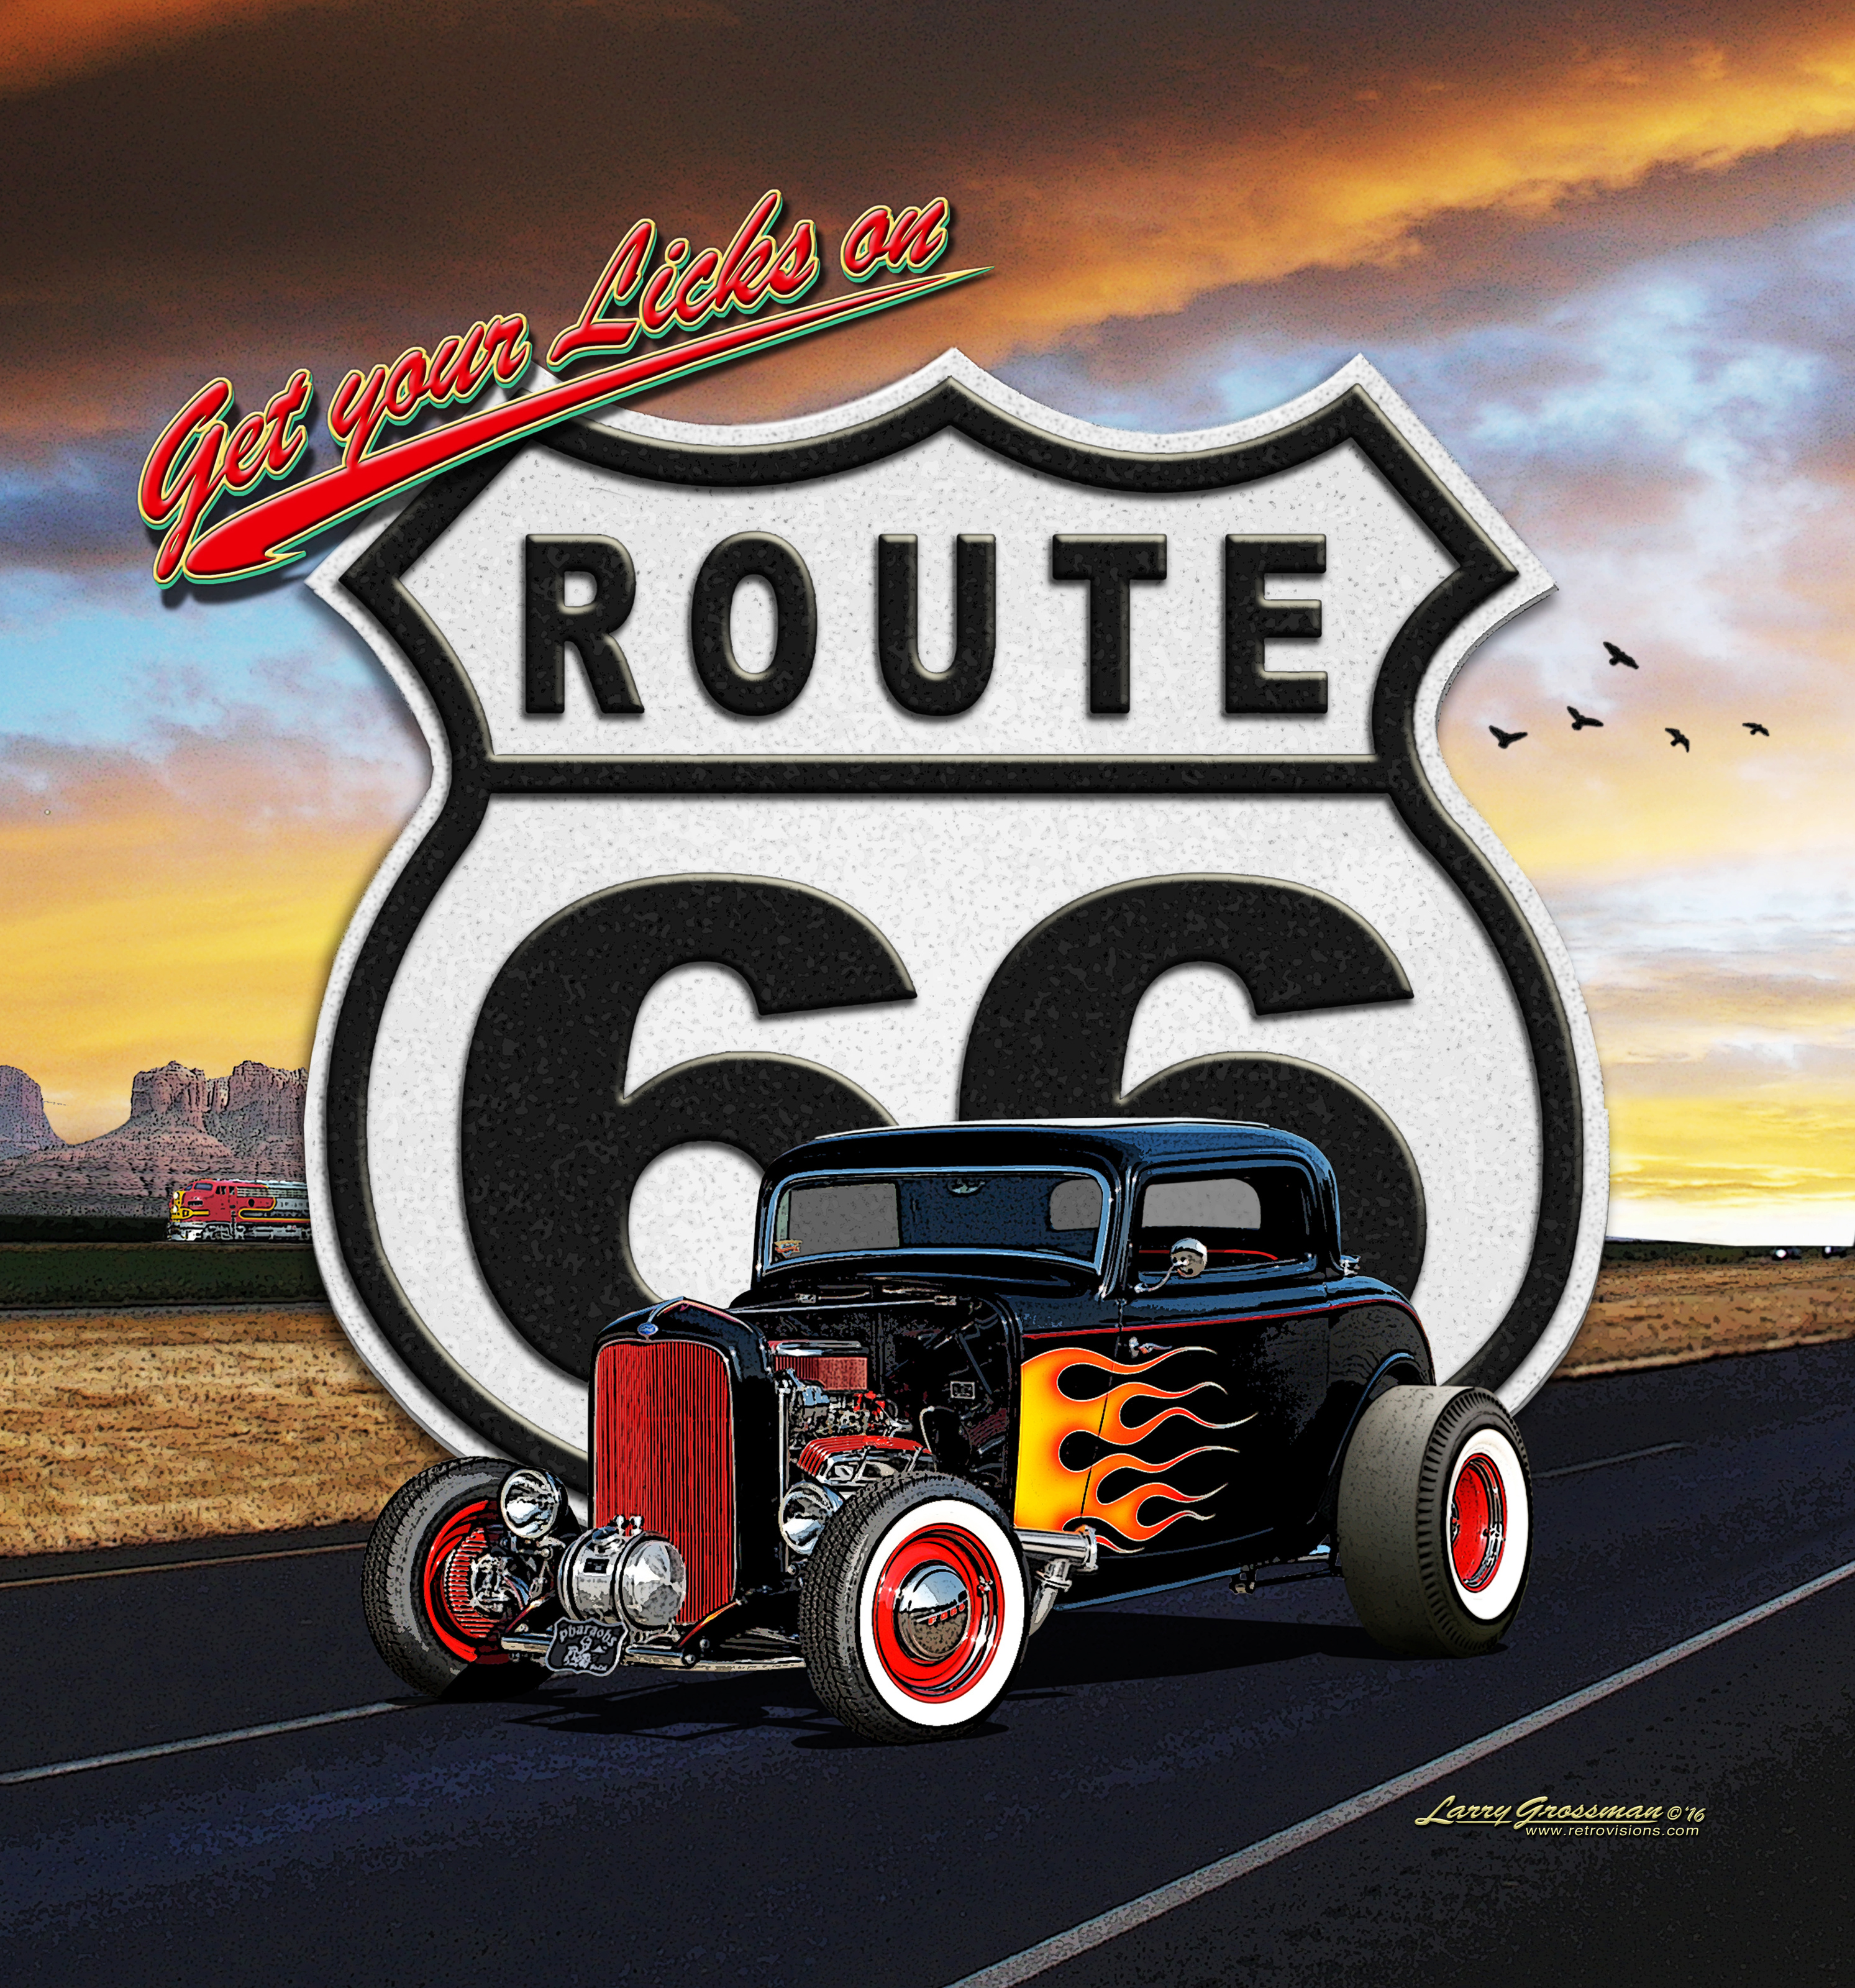 Route 66 Photos Download The BEST Free Route 66 Stock Photos  HD Images